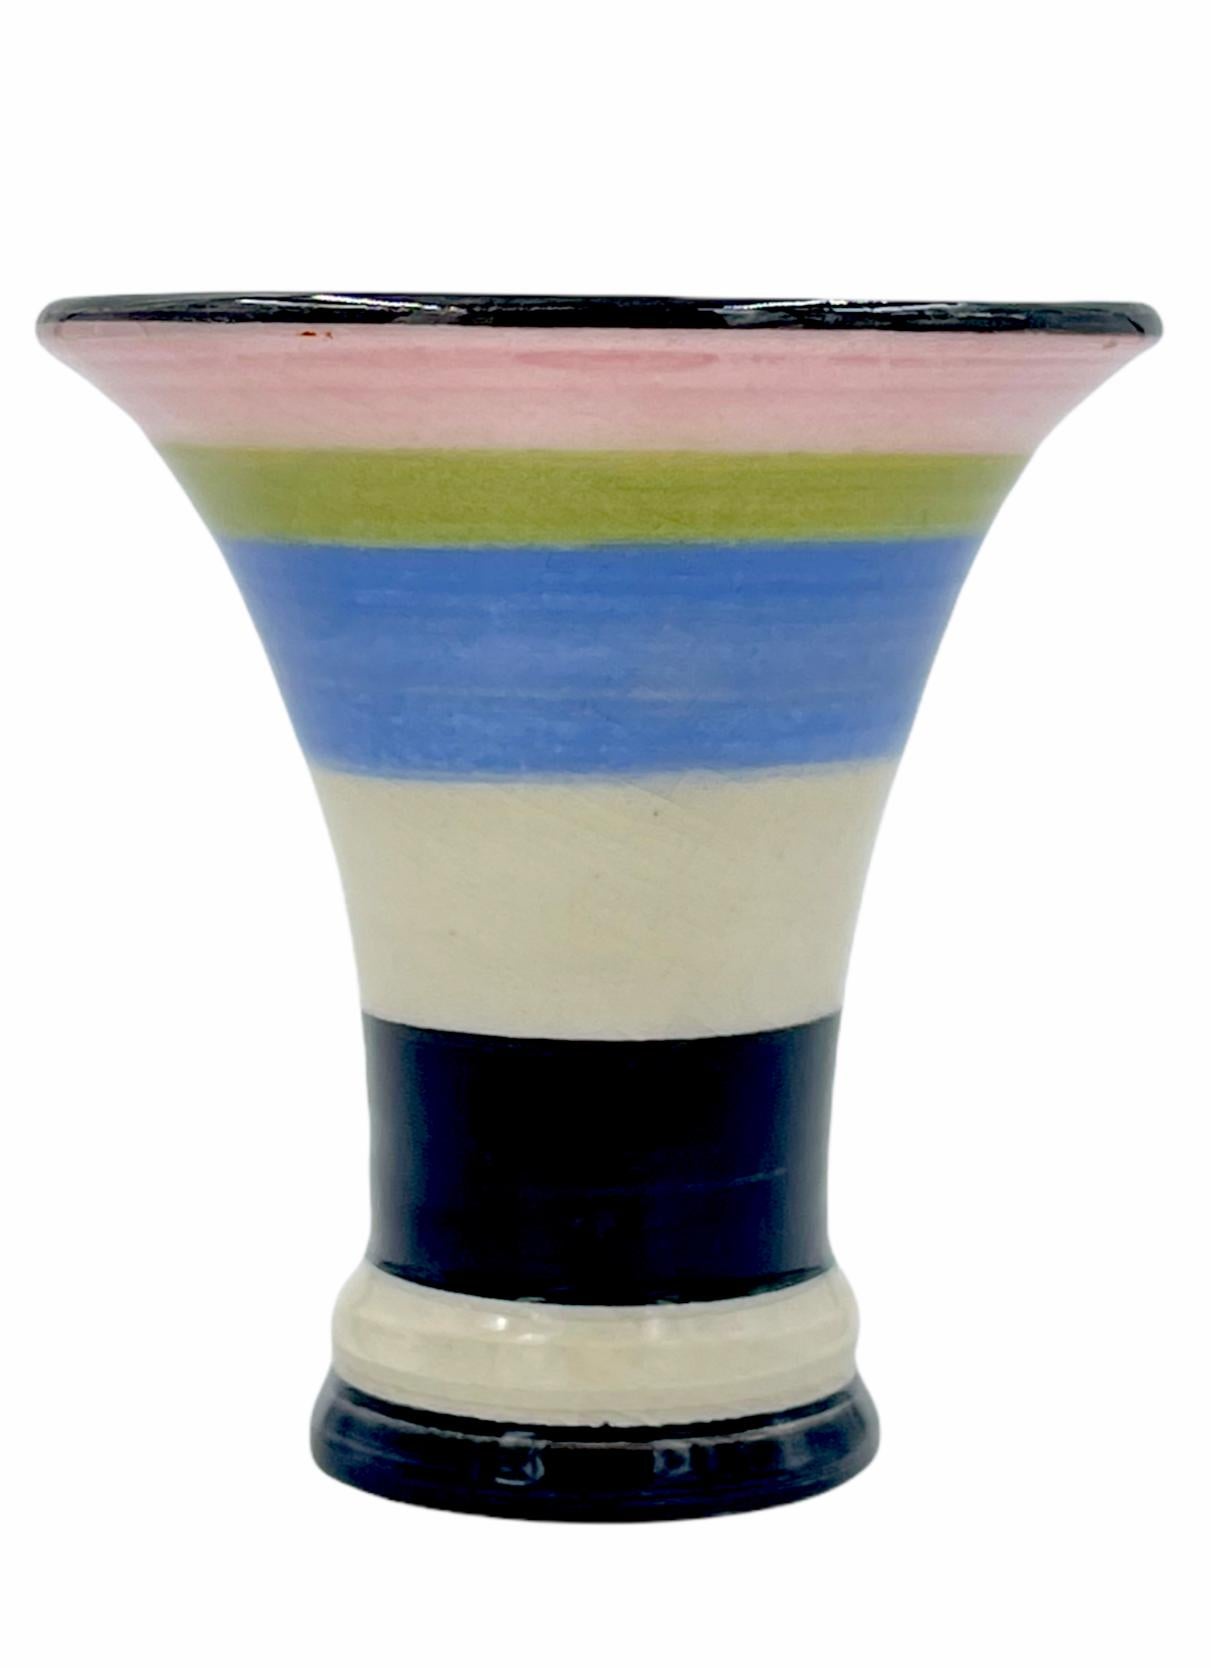 Expo Vase 1998 in colors of black, blue, pink and green. Peter Shire, a founding member of Sottsass' Memphis Milano Group is an LA-based artist whose work eludes all attempts at categorization. He has created ceramics, furniture, toys, interior